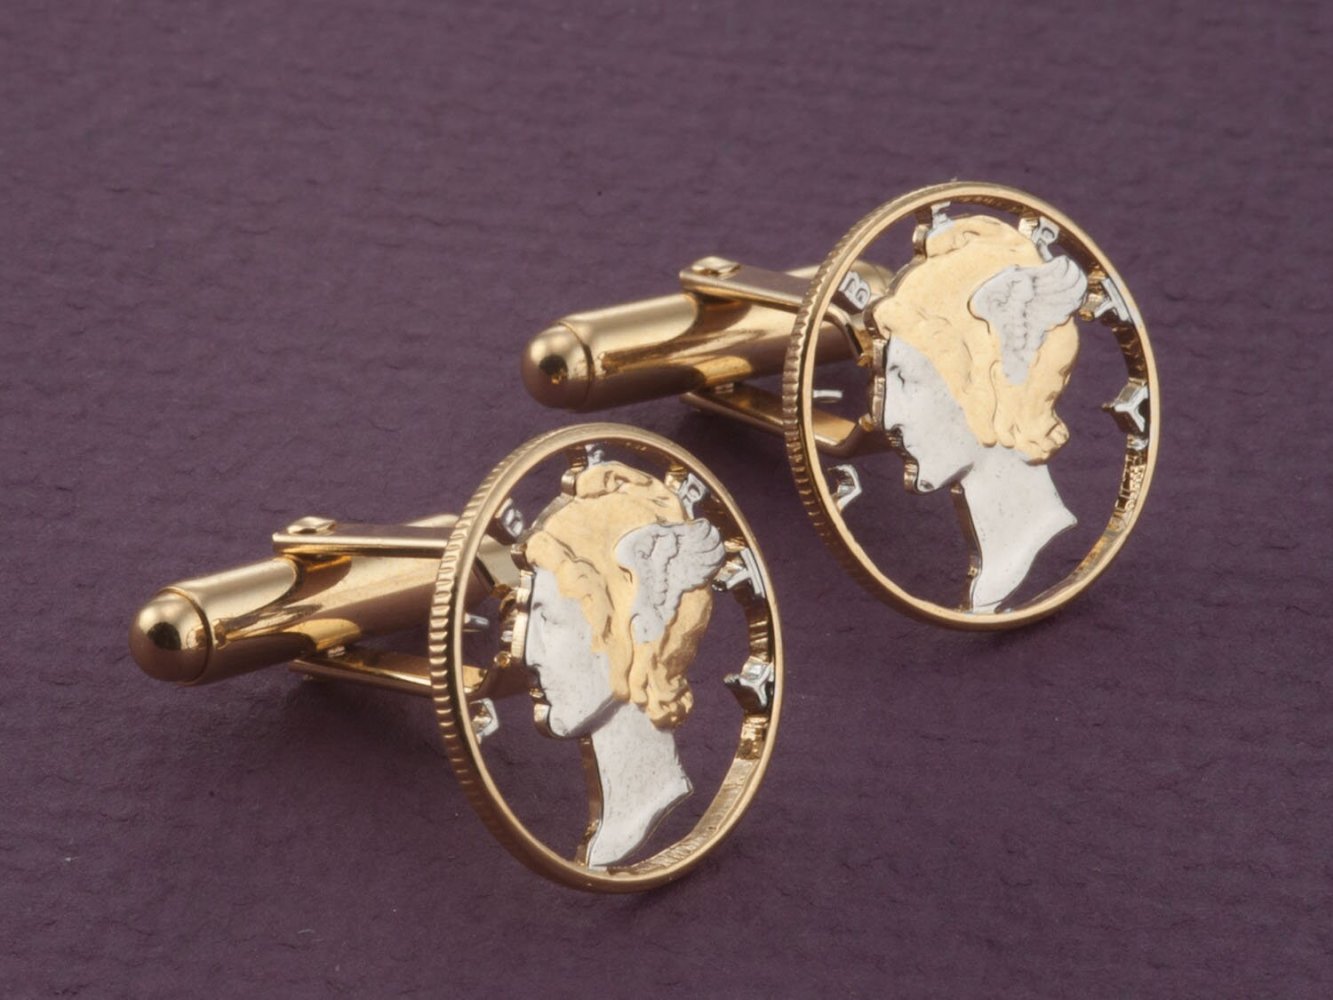 Details about   Mercury Dime Cufflinks Original Coins set in base metal Rhodium or Gold plated 